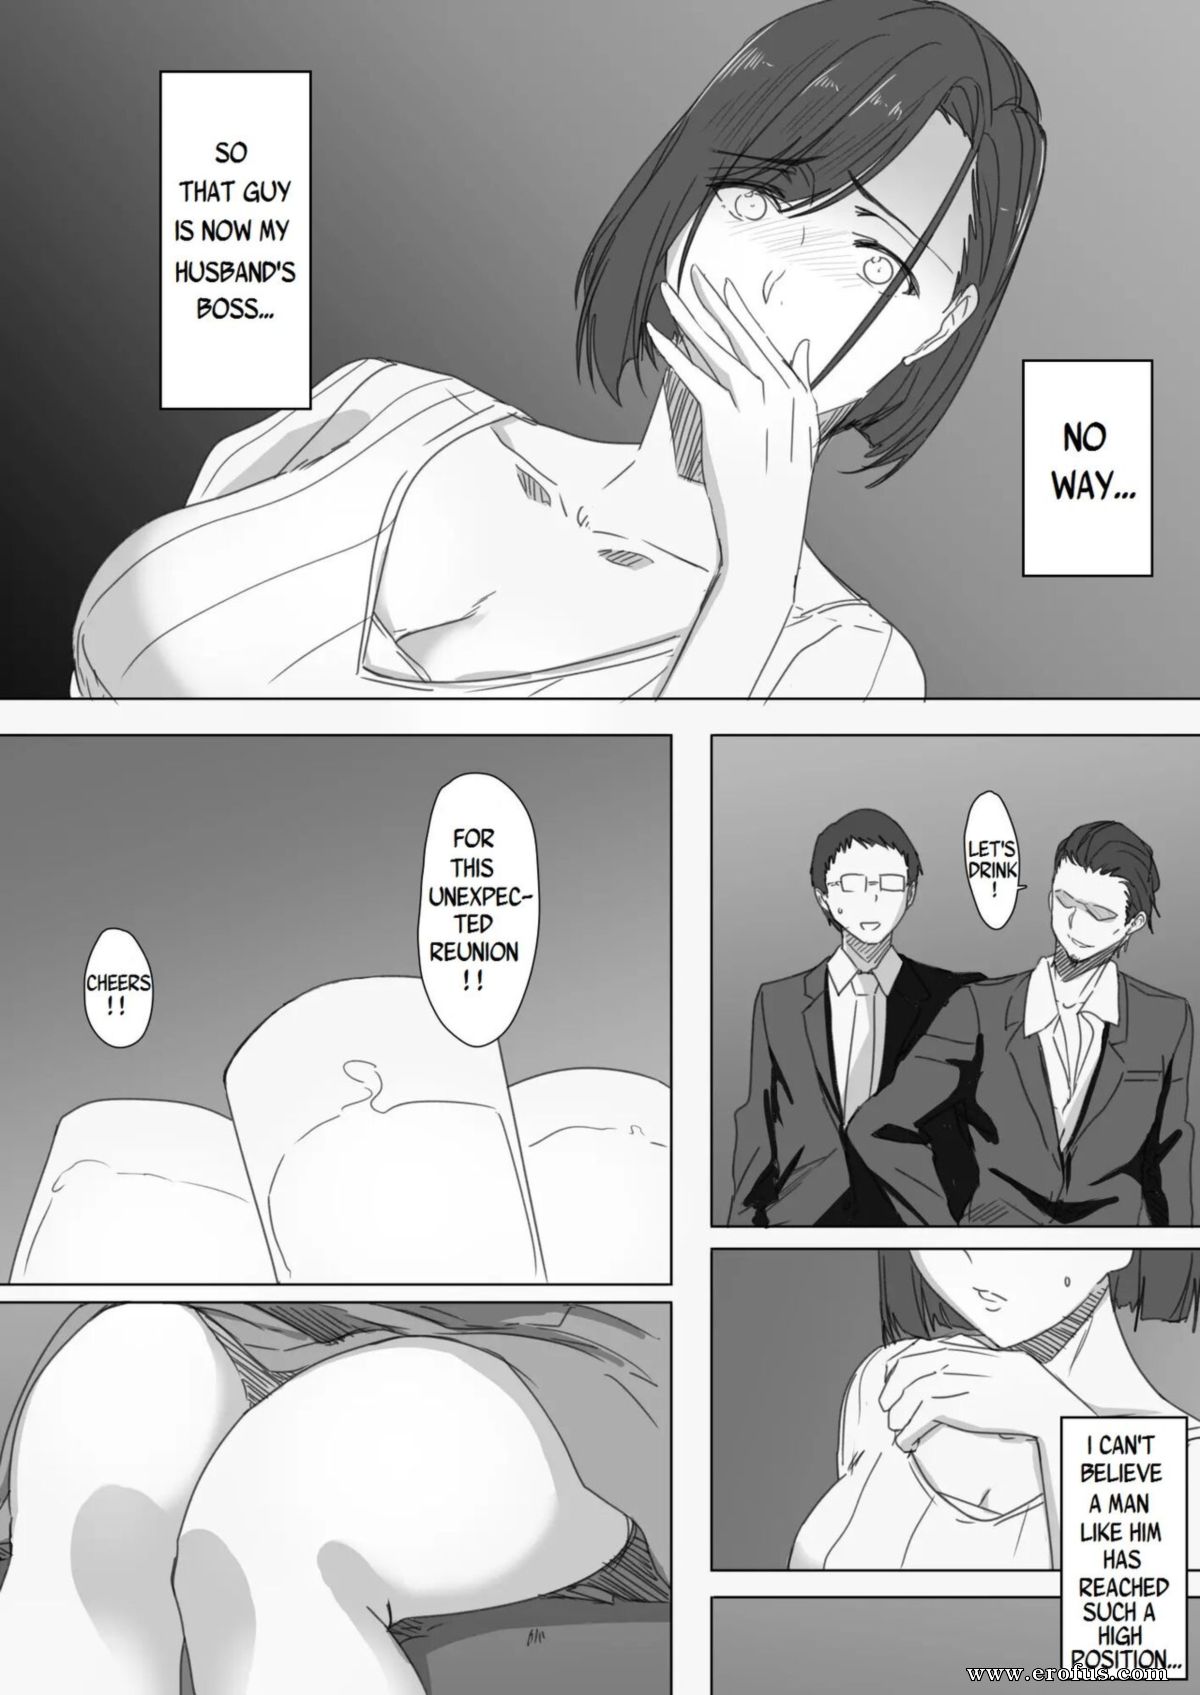 Page 7 hentai-and-manga-english/hari-poteto/this-arrogant-wife-got-ntr- fucked-by-her-husbands-boss Erofus image